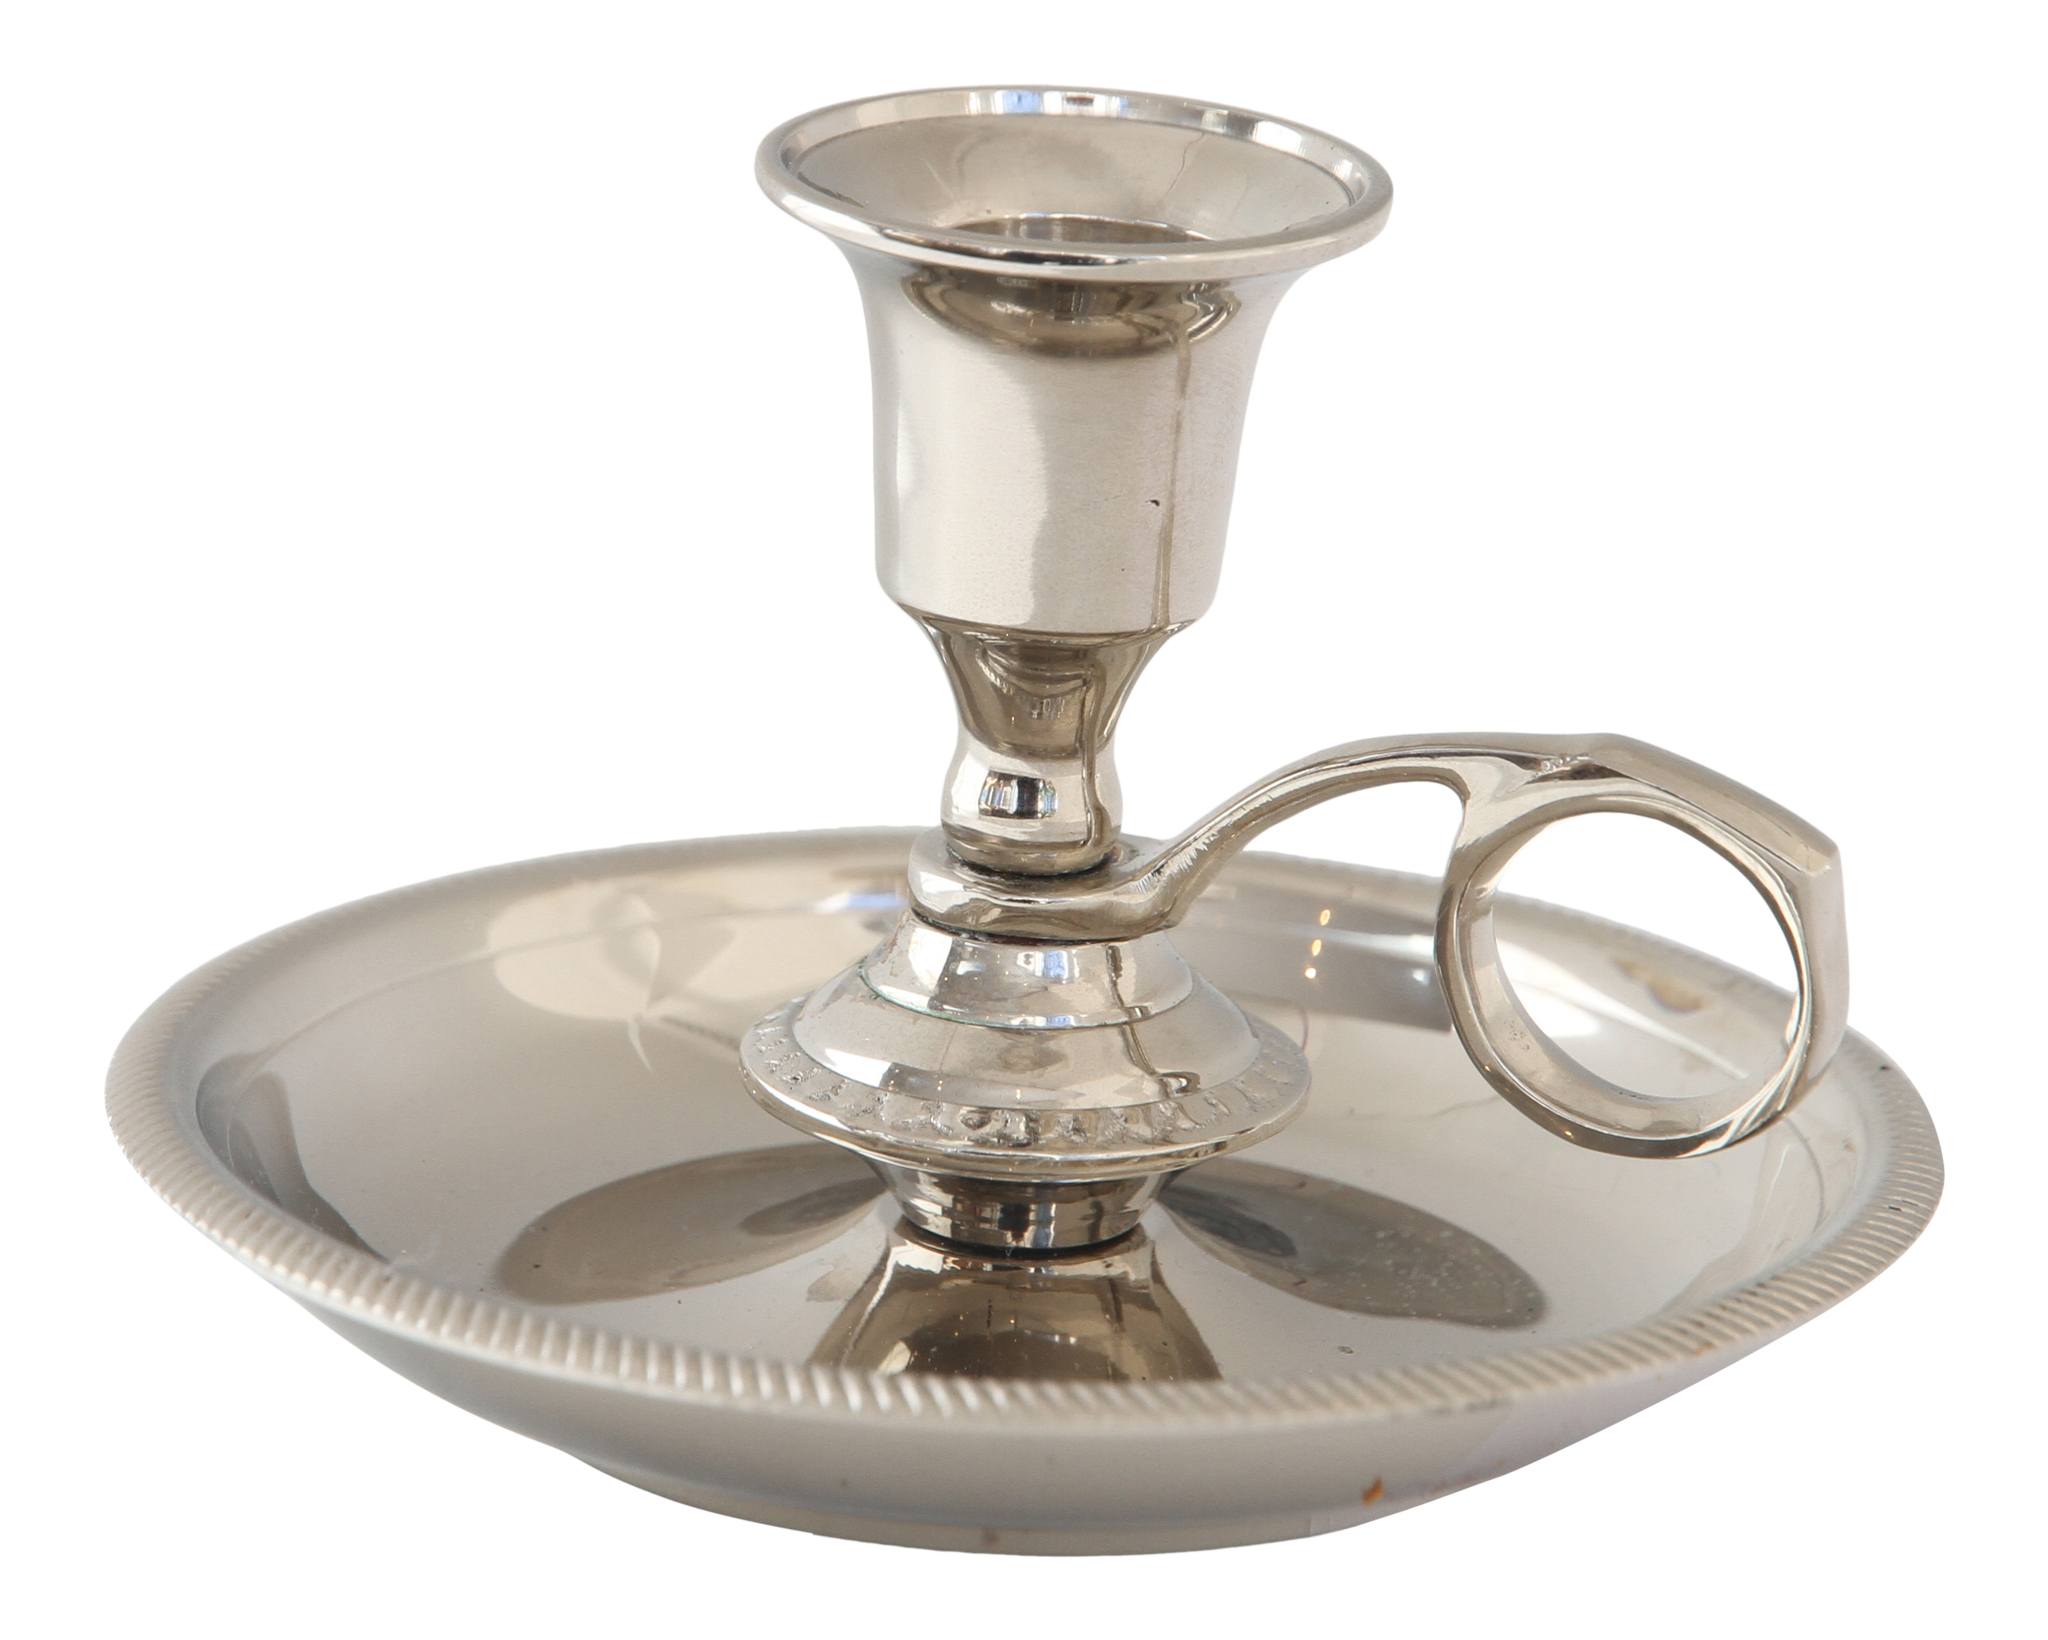 Candlestick in nickel-plated brass that can be made into a tall or low candlestick